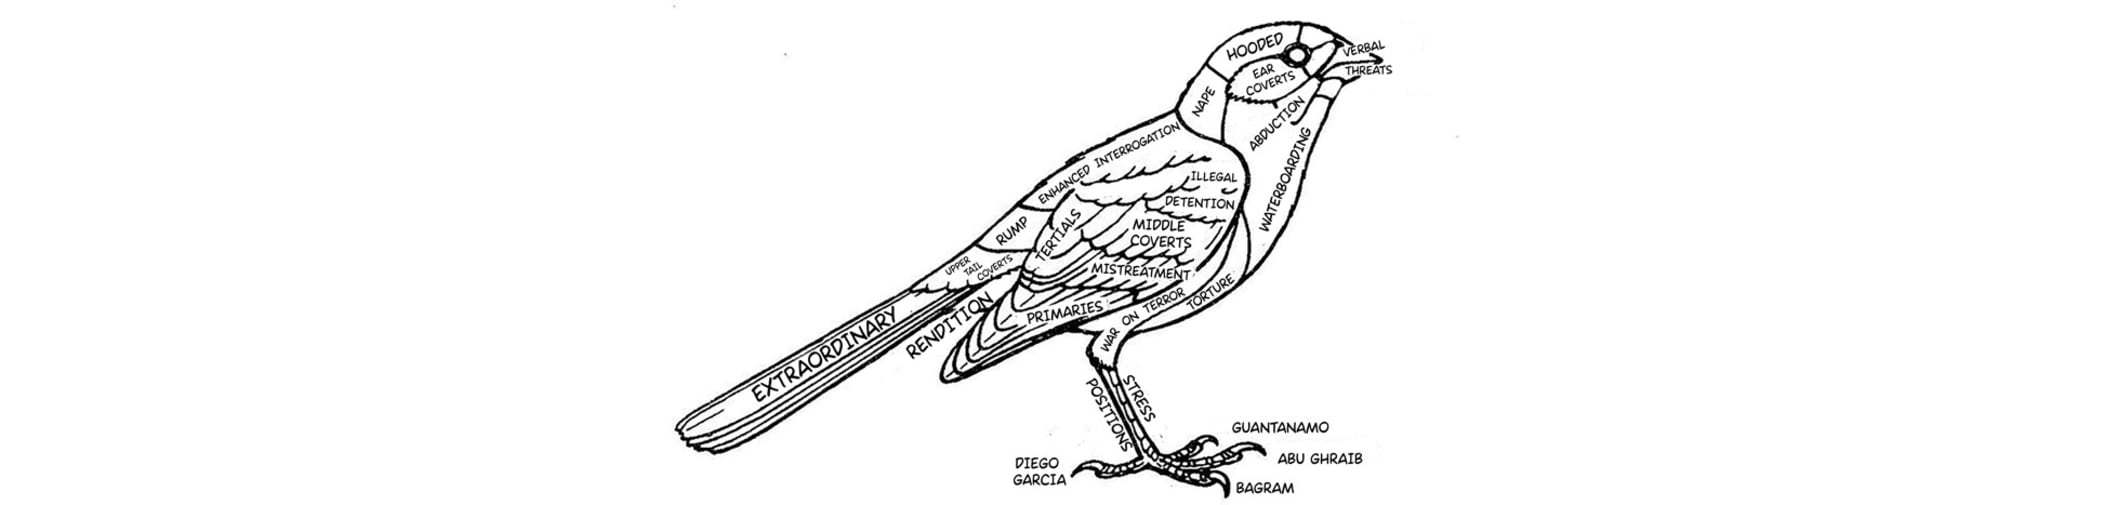 Line drawing of bird in black and white, covered in words like rendition, war on terror, torture.